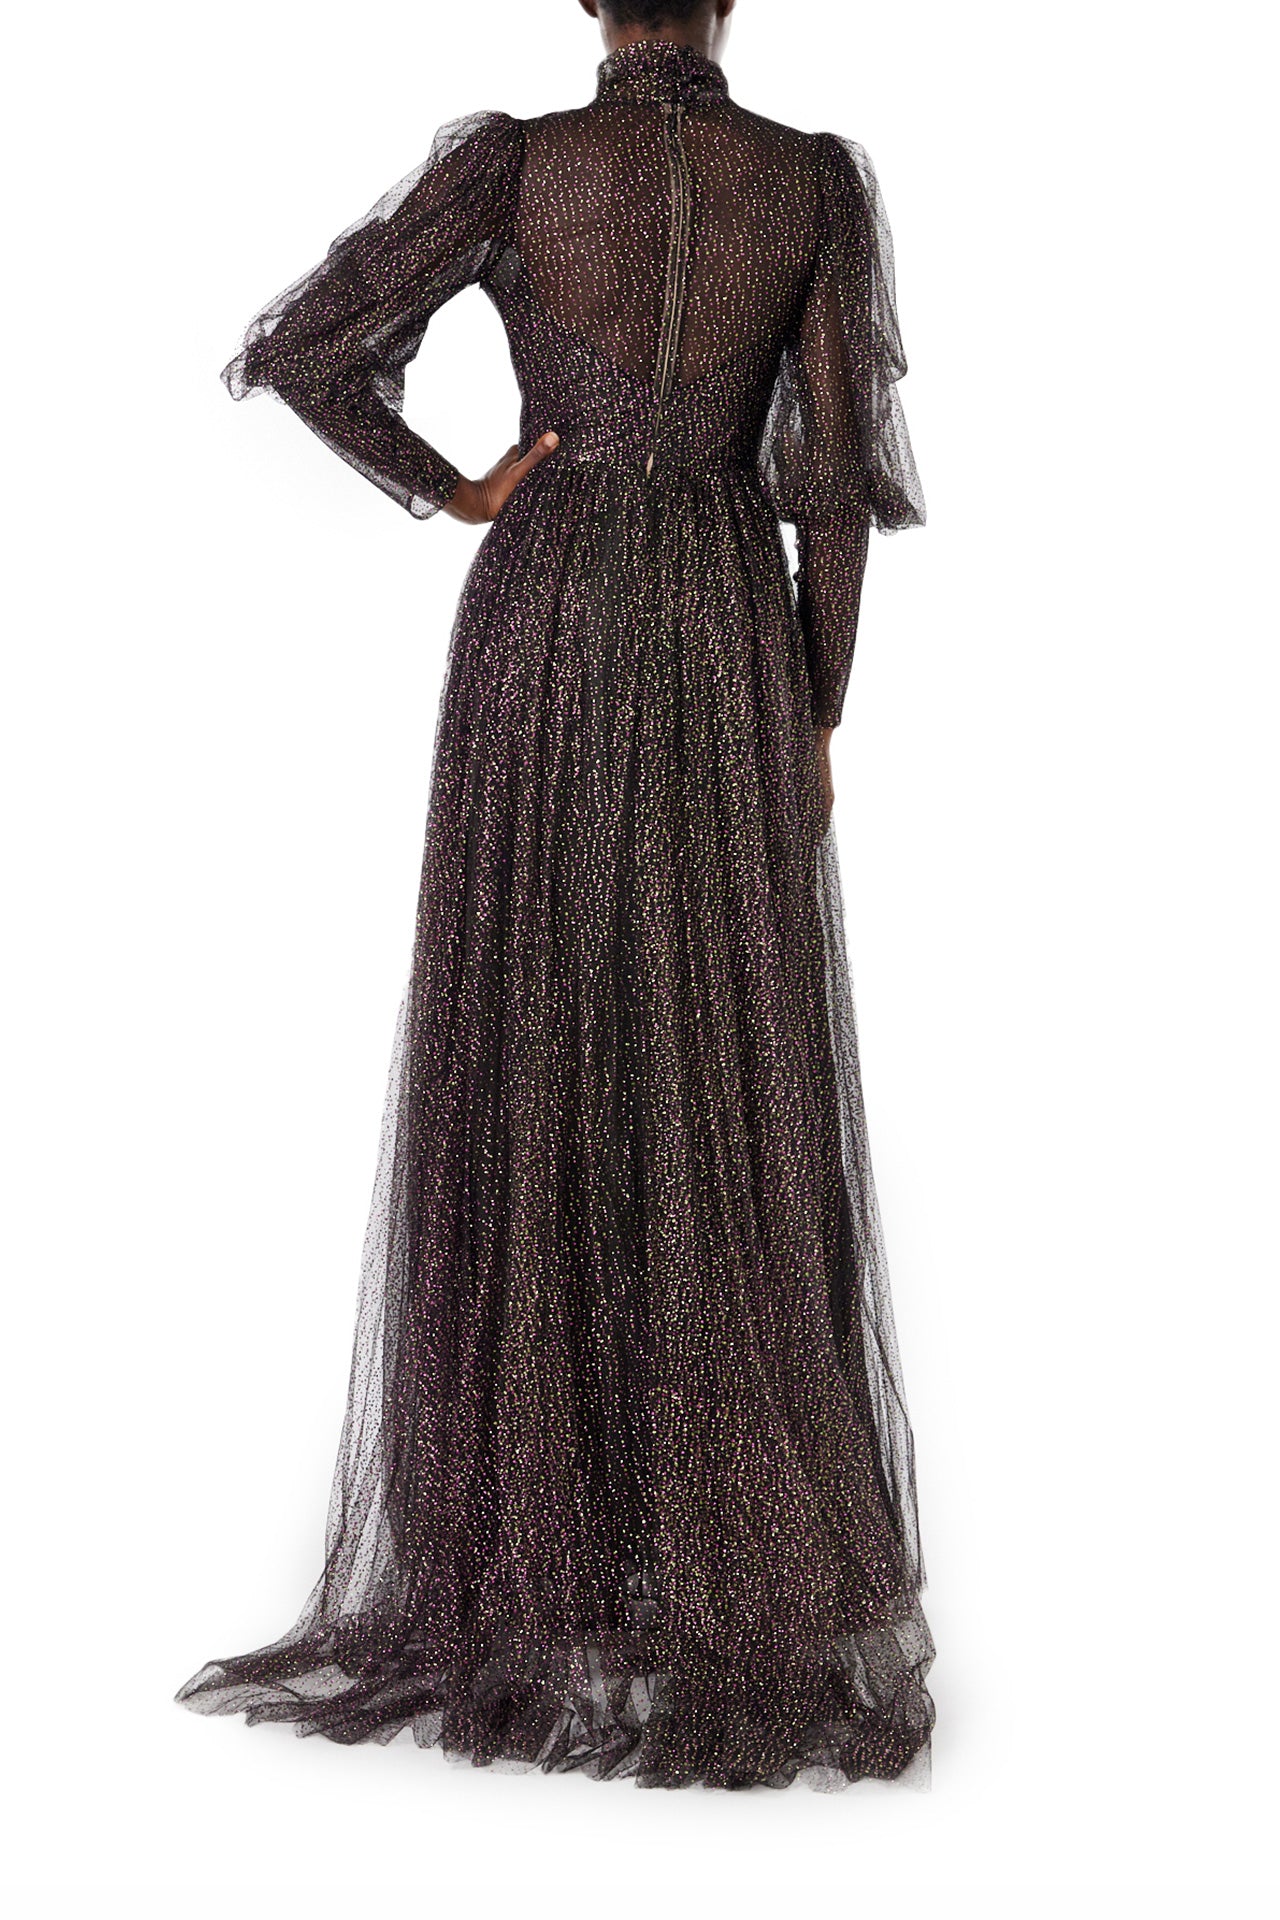 Monique Lhuillier Spring 2024 long sleeve gown with high neck in noir and multi colored glitter tulle fabric - back.